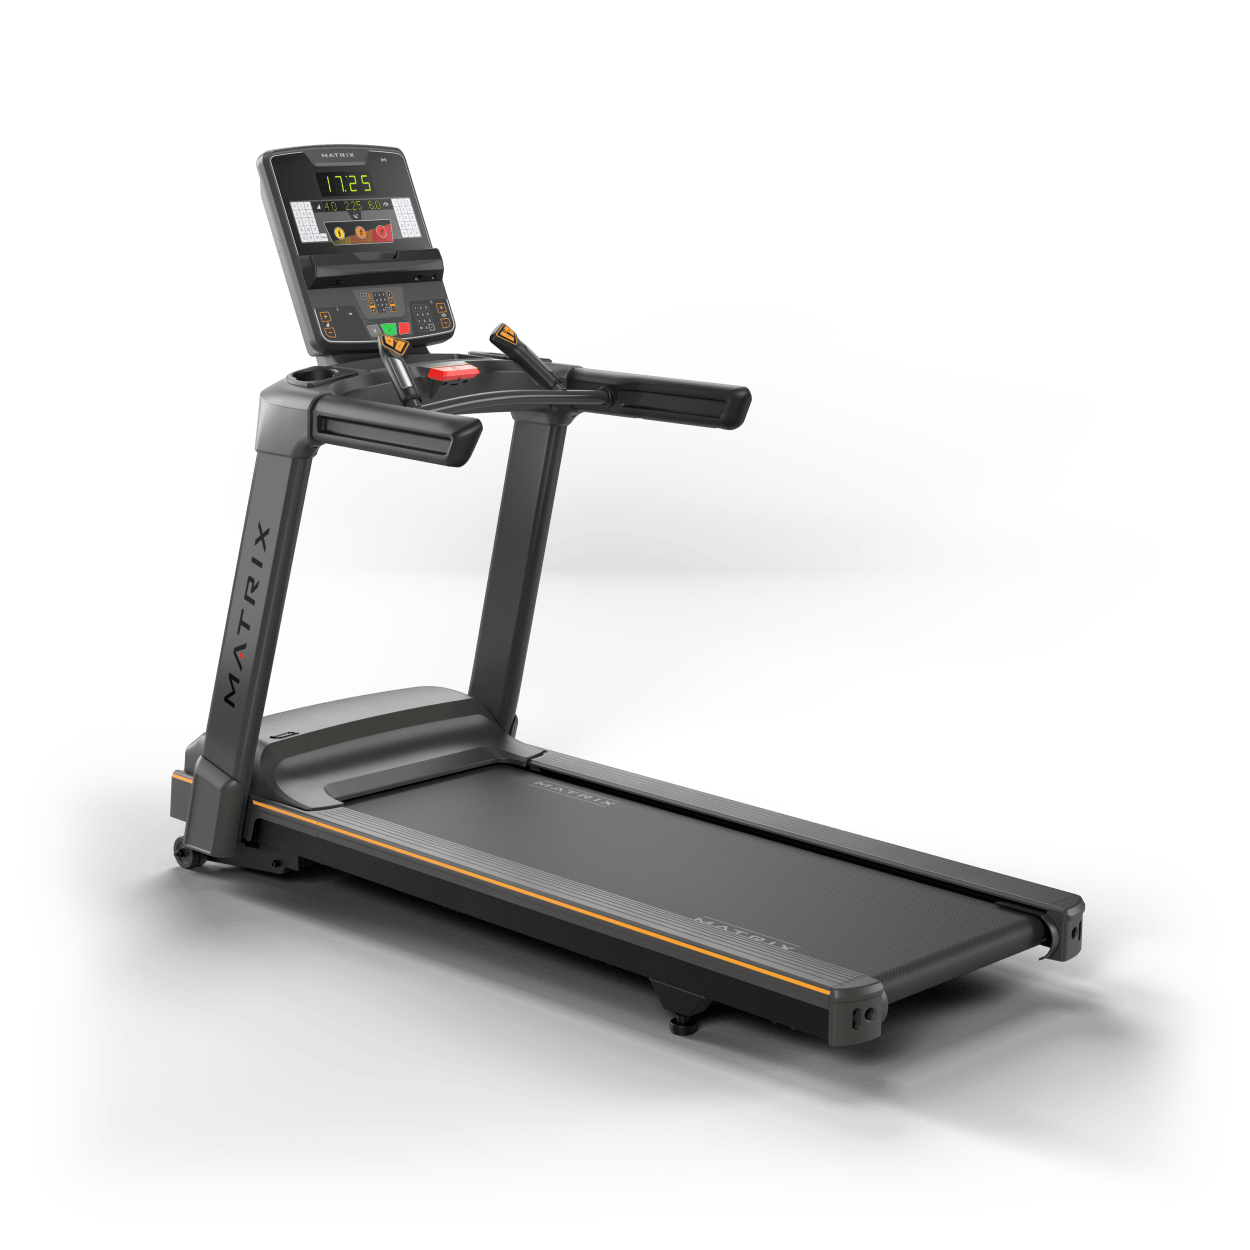 Matrix Fitness Lifestyle Treadmill with Group Training Console front view | Fitness Experience